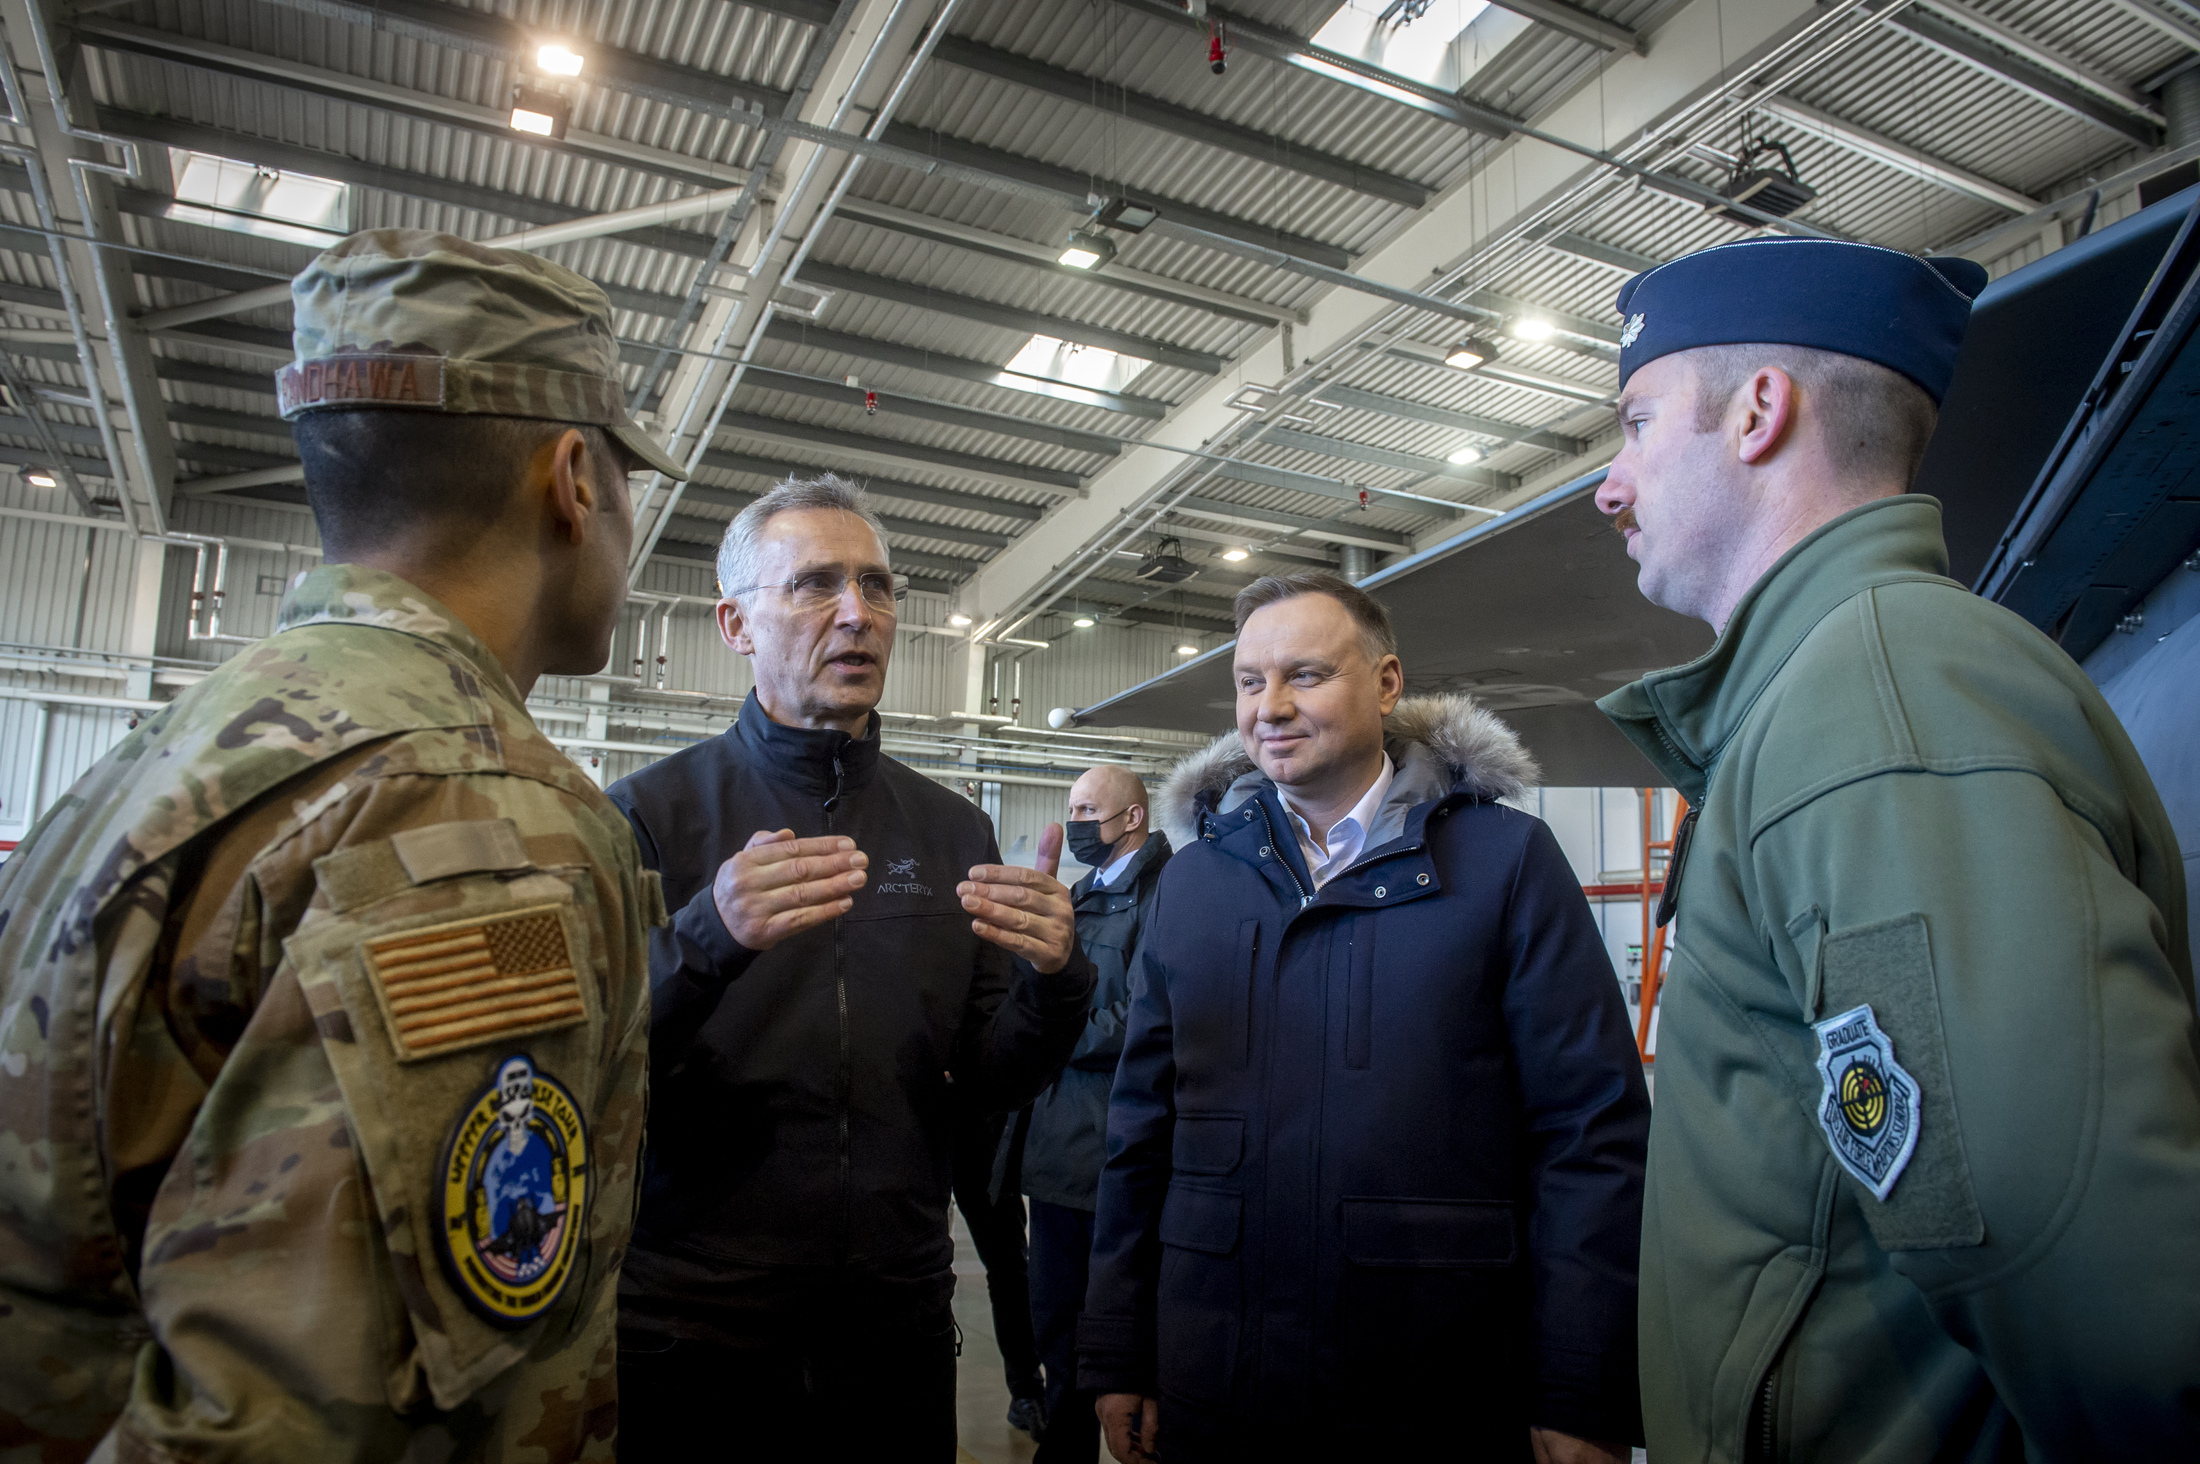 NATO Secretary General Jens Stoltenberg (2nd left) and Polish President Andrzej Duda (2nd right) speak with NATO officers at the military air base in Lask, Poland on March 1.